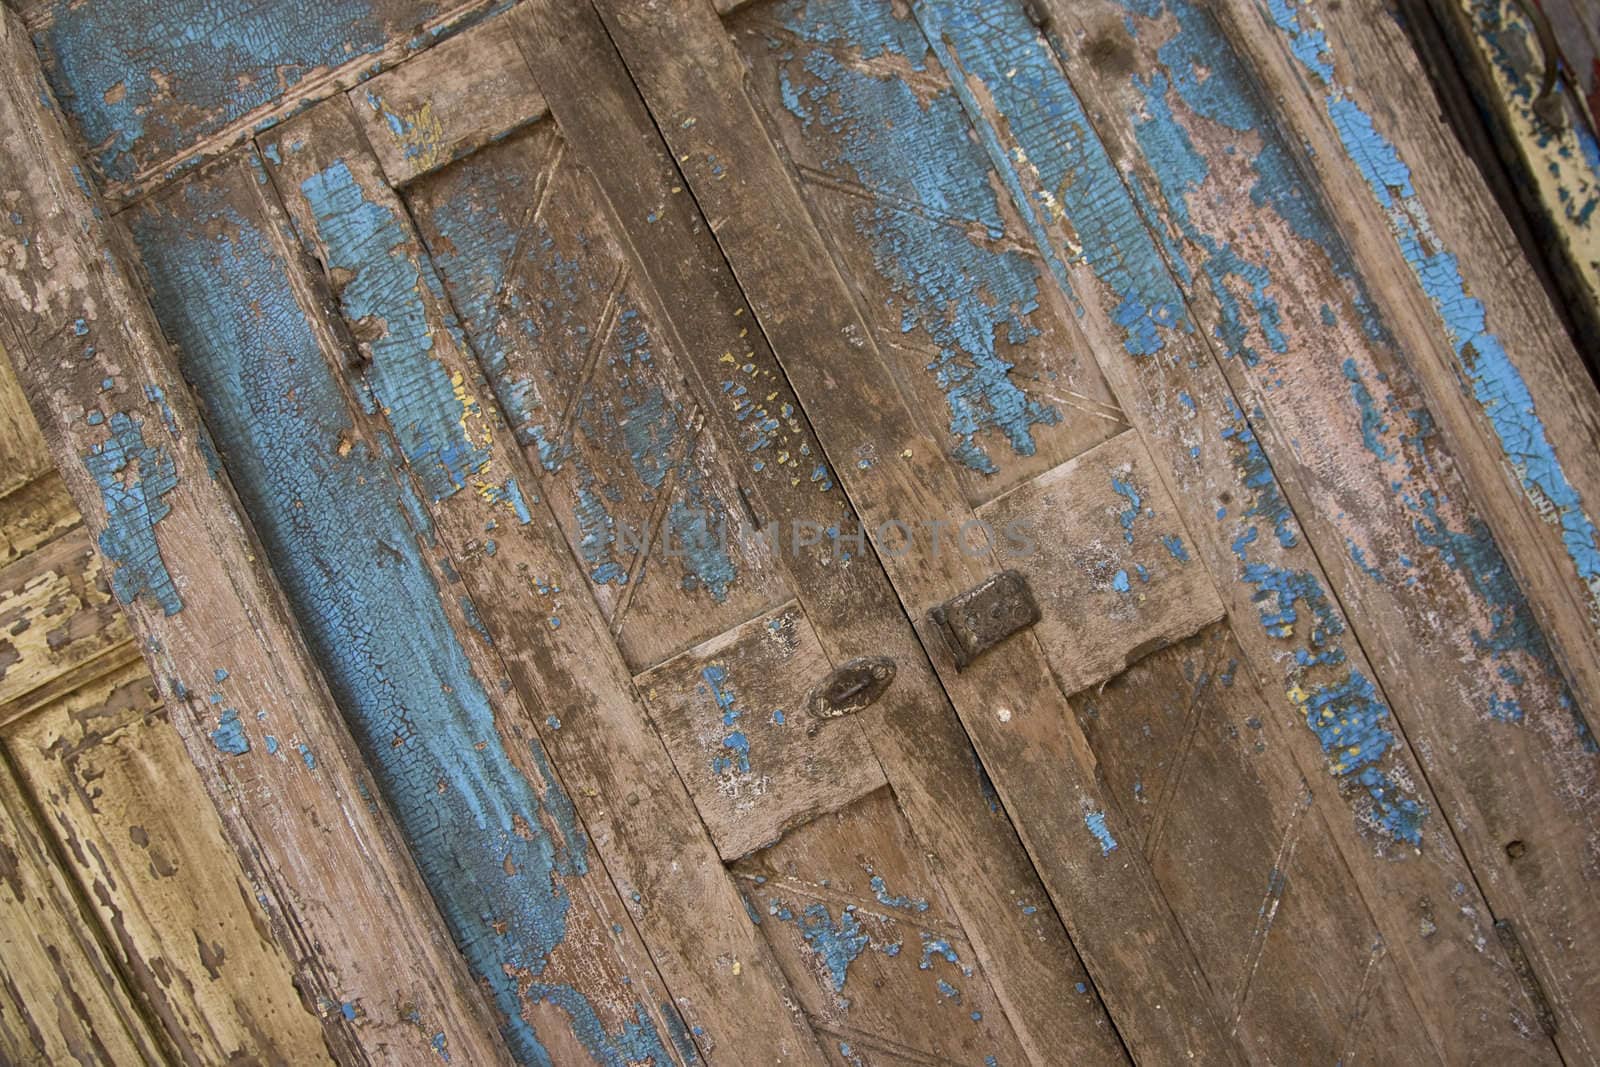 An antique painted blue door that is made out of weathered wood.